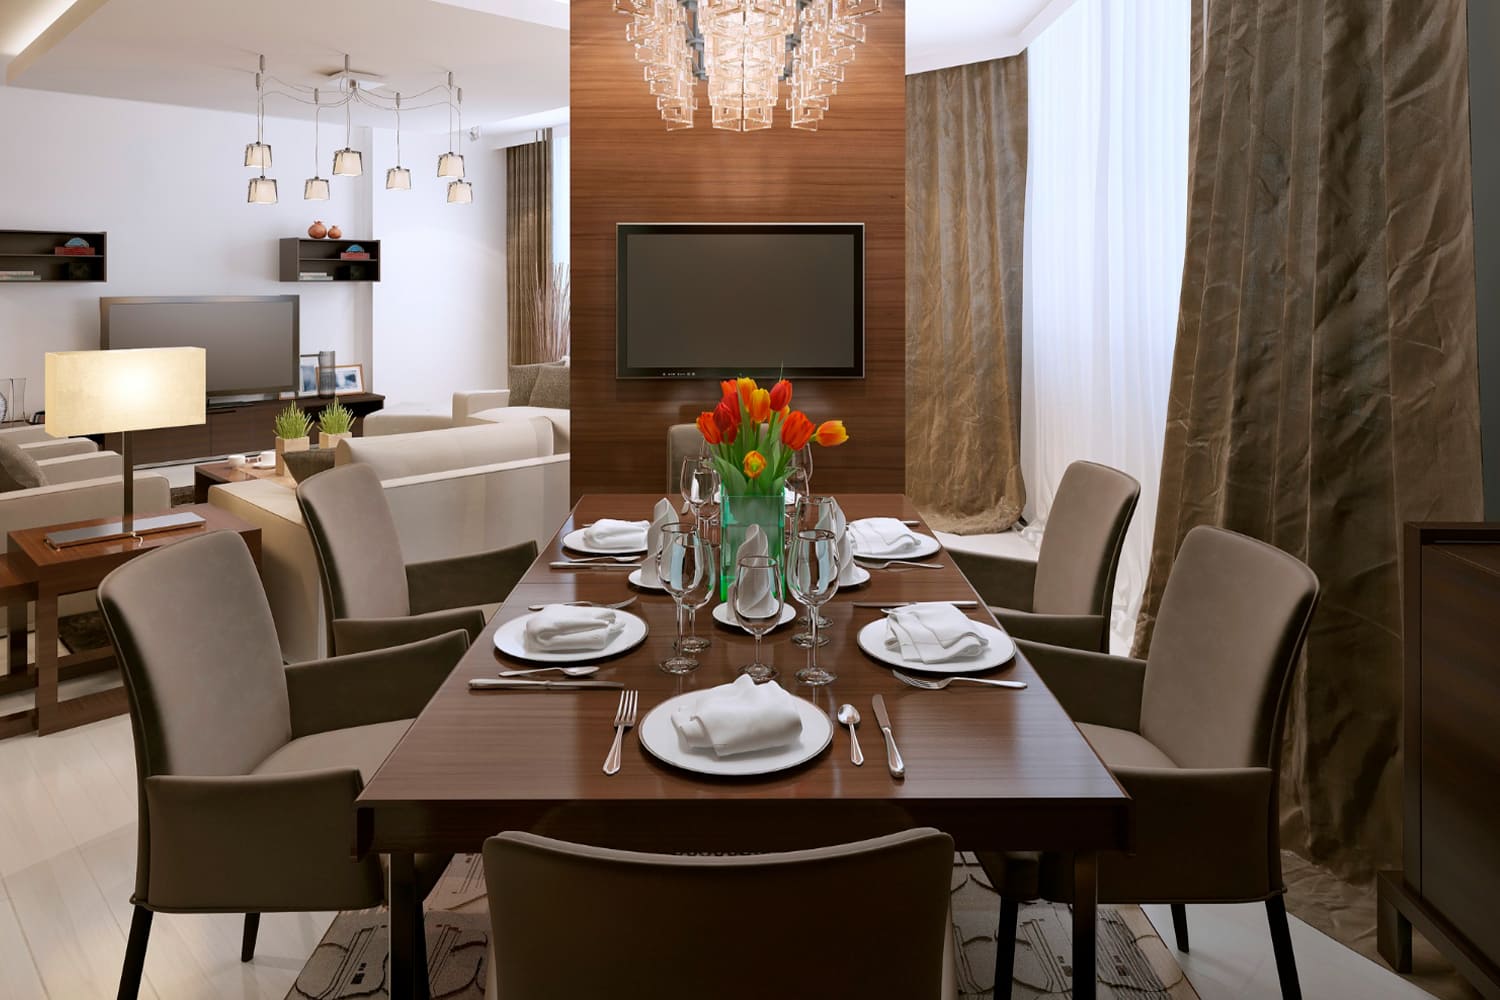 6-seater dining room included in your living room interiors creating a space that is not just visually stunning but also tailored to meet the unique preferences and lifestyle of its occupants